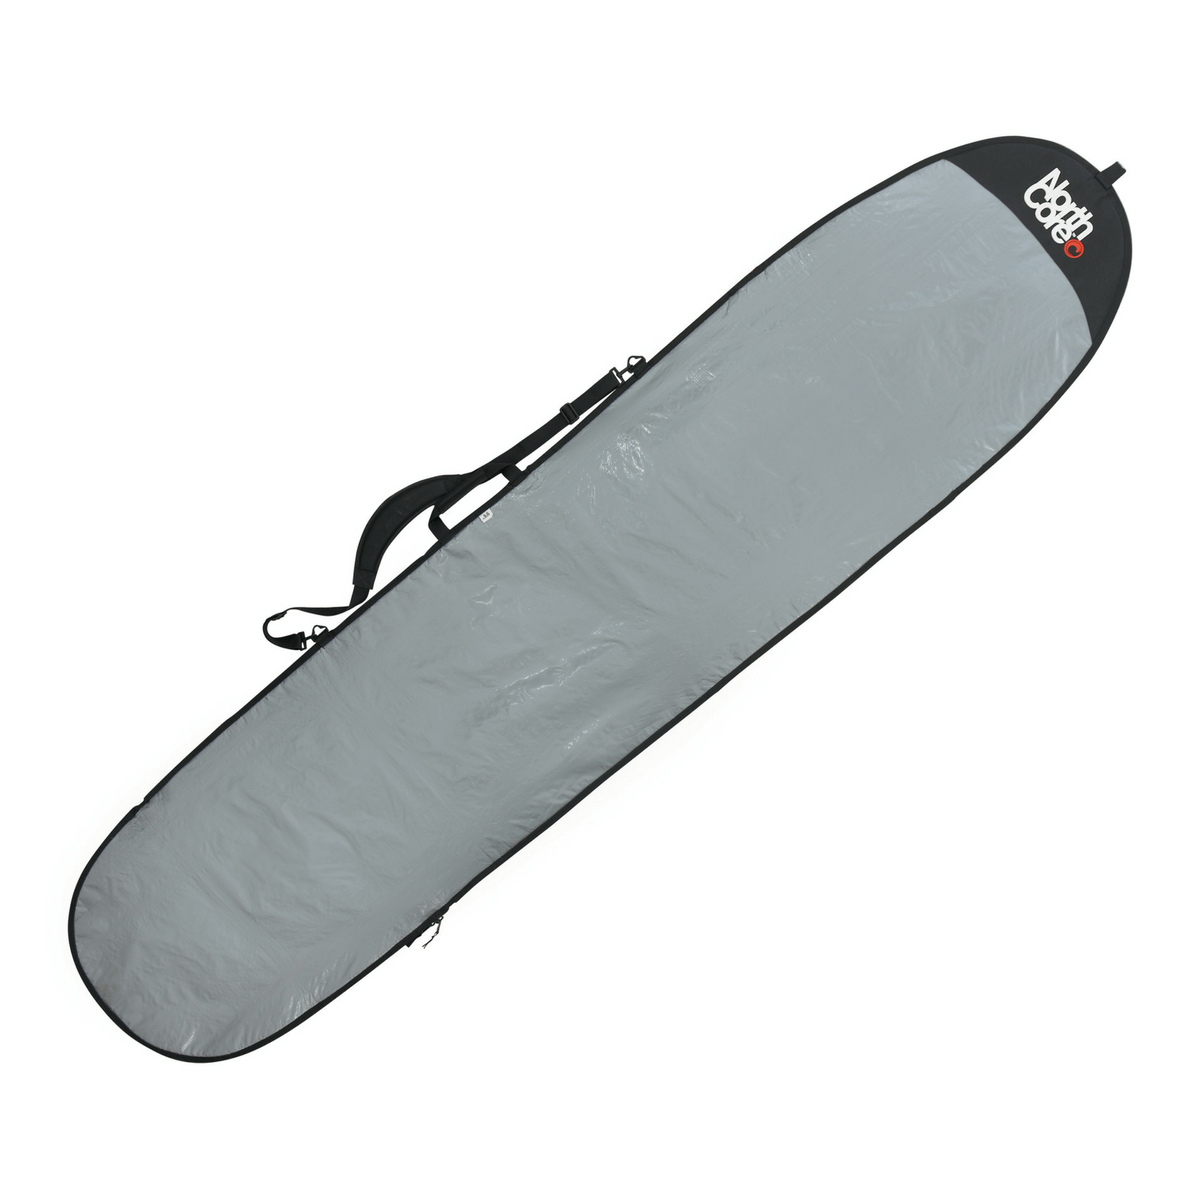 Northcore 9'6" Addiction Longboard Surfboard Bag - Surfboard Day Runner Bag/Cover by Northcore 9ft 6in